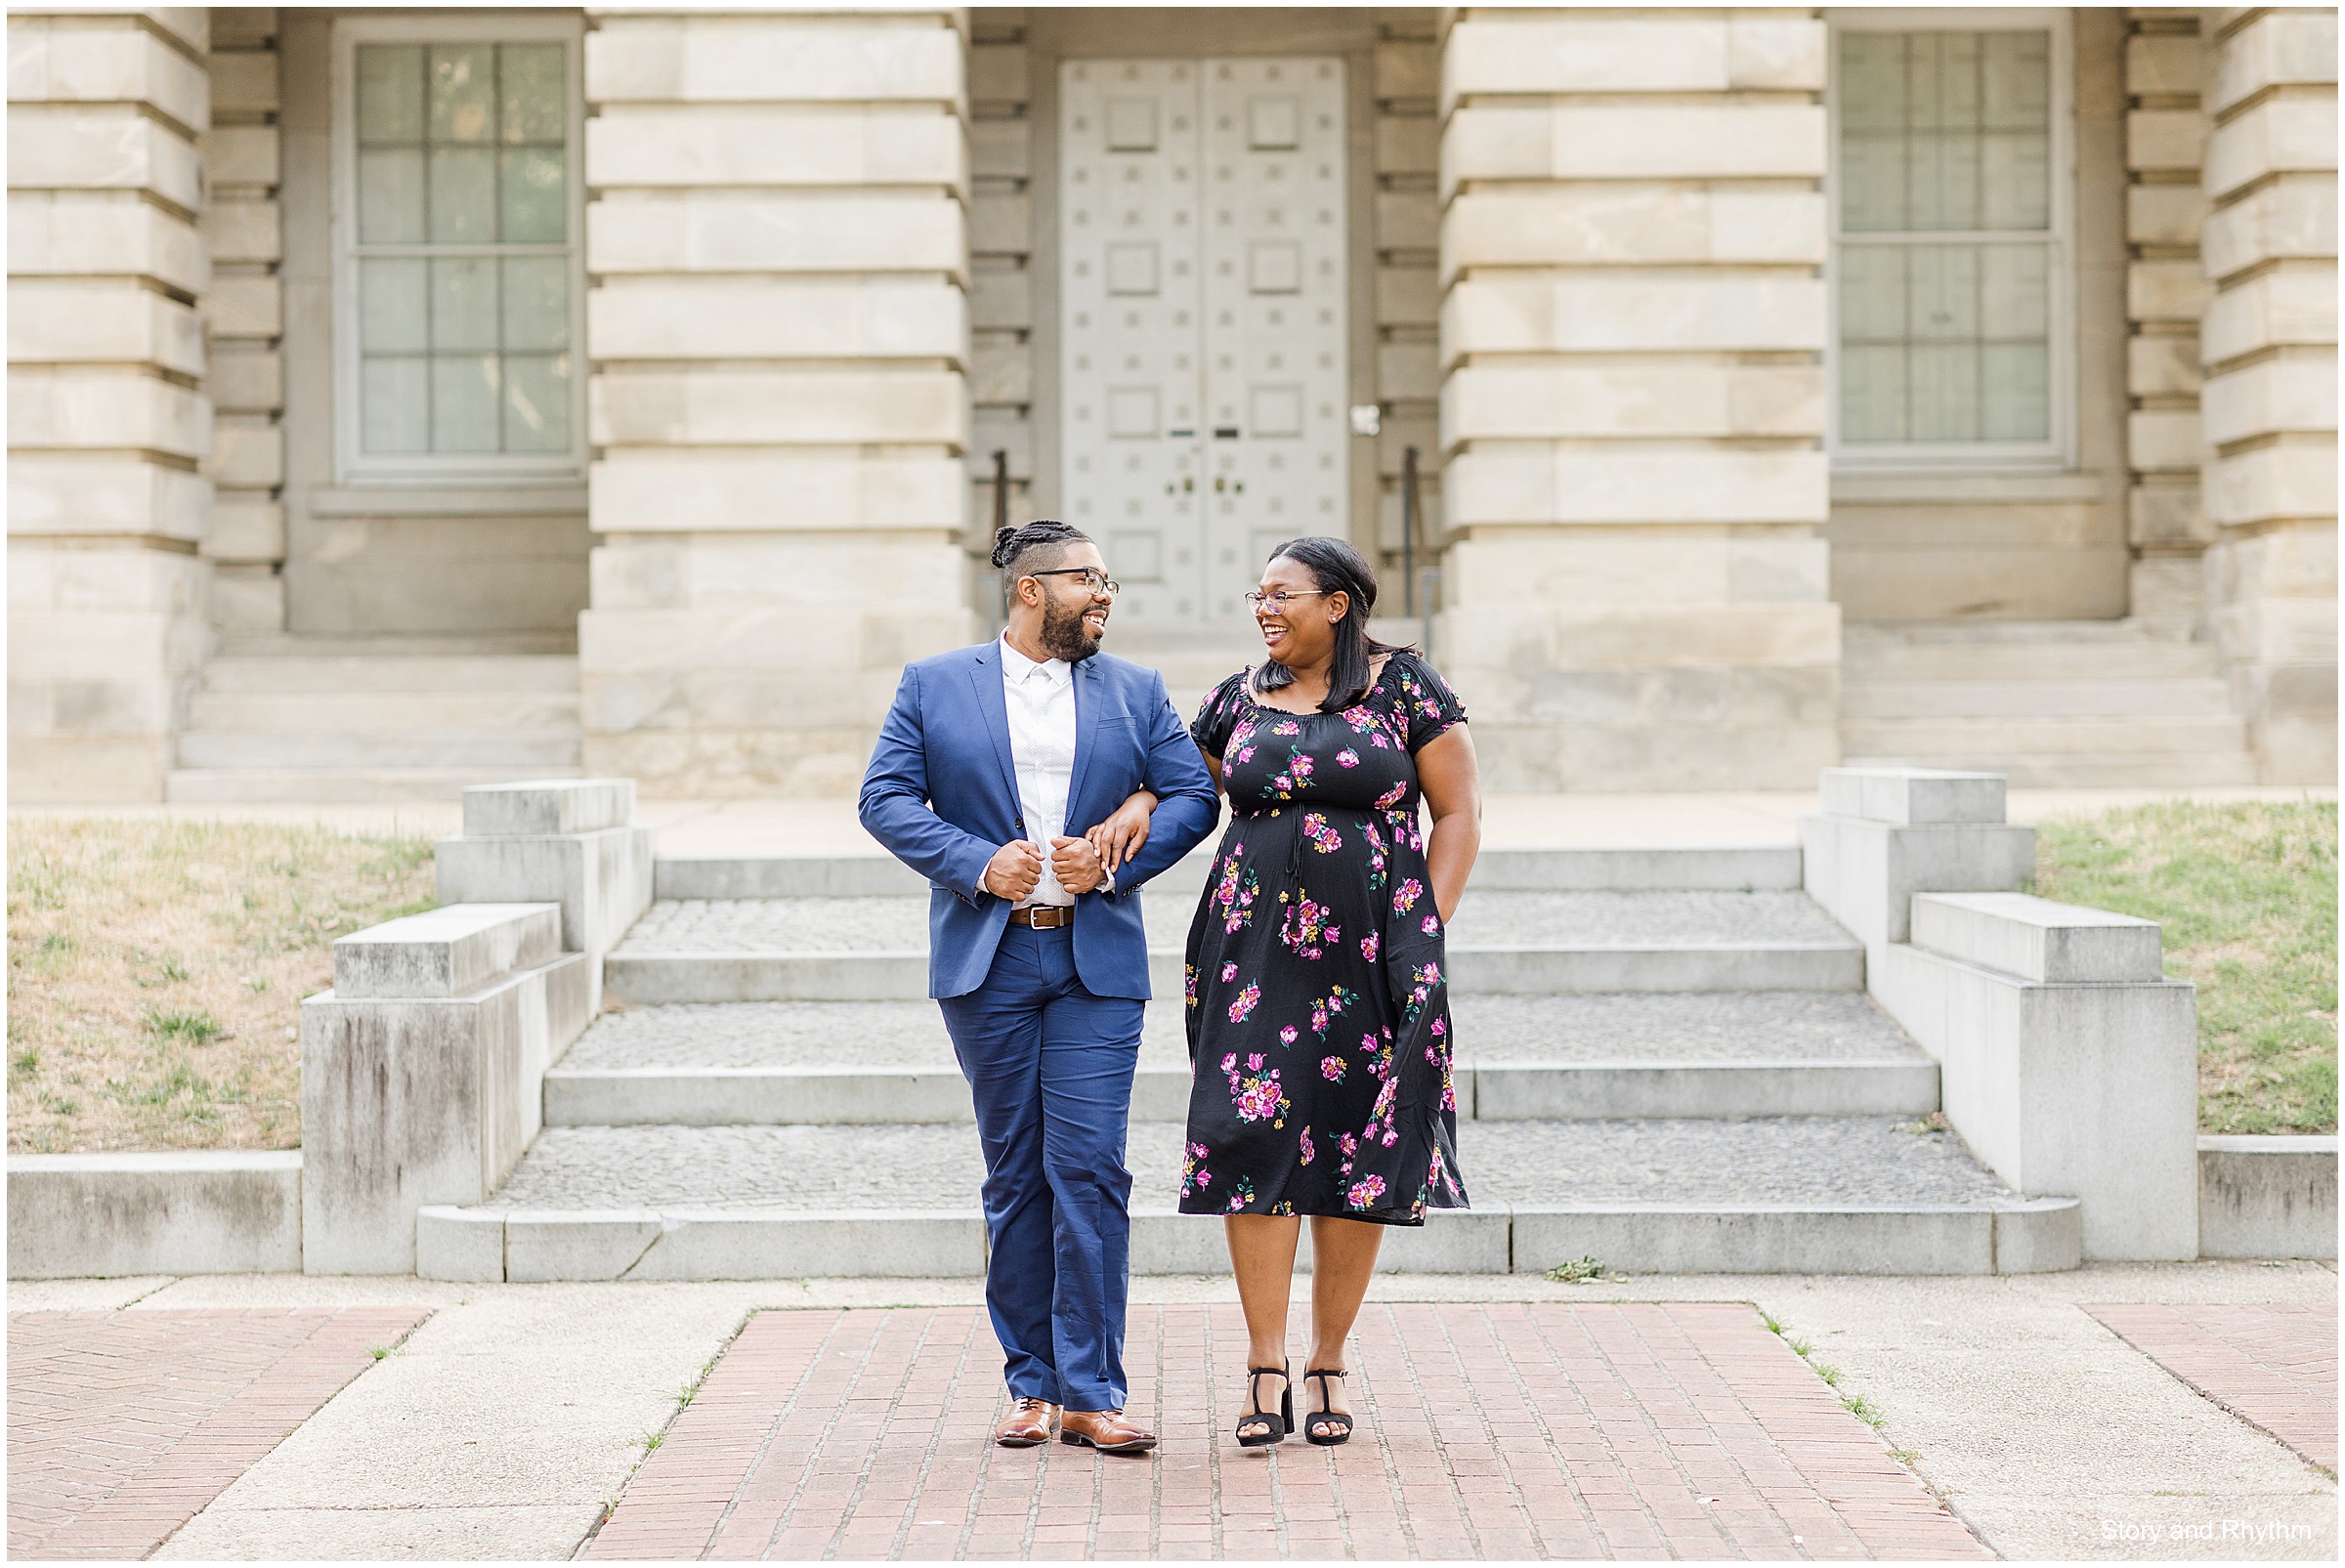 Downtown Raleigh engagement photos